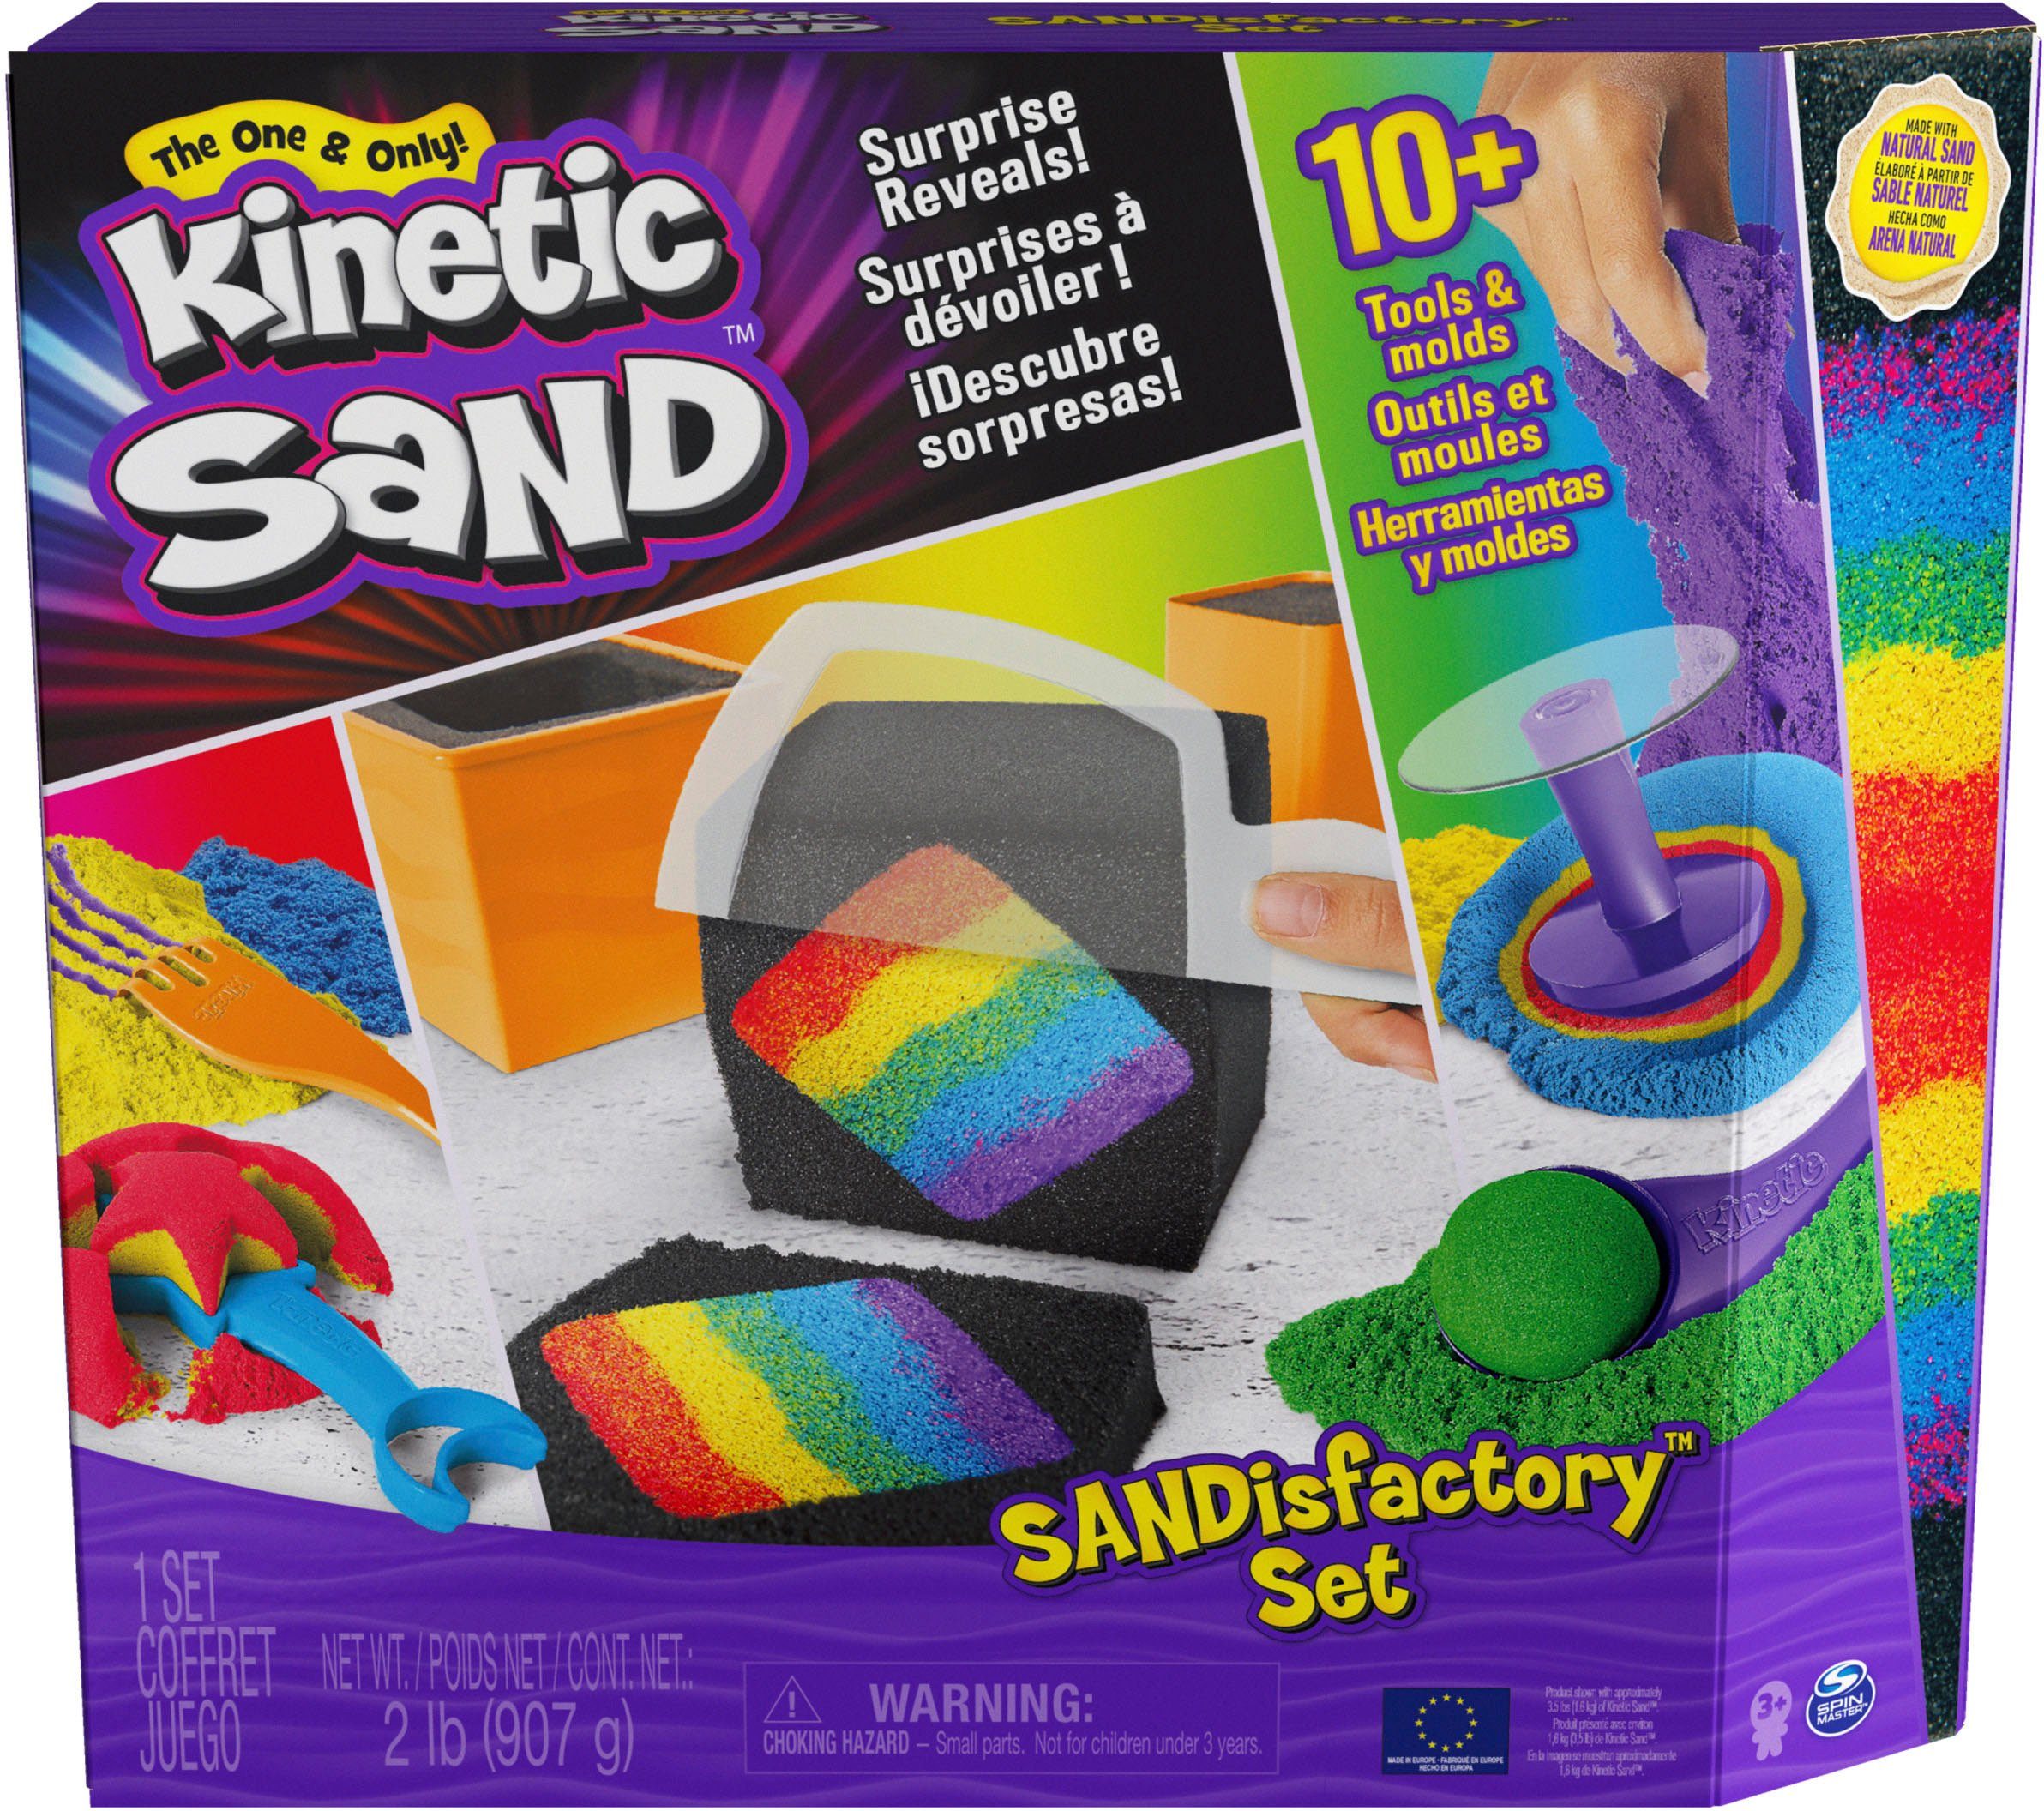 Kreativset Kinetic Made Master Sandisfactory in Set, Spin Europe Sand,